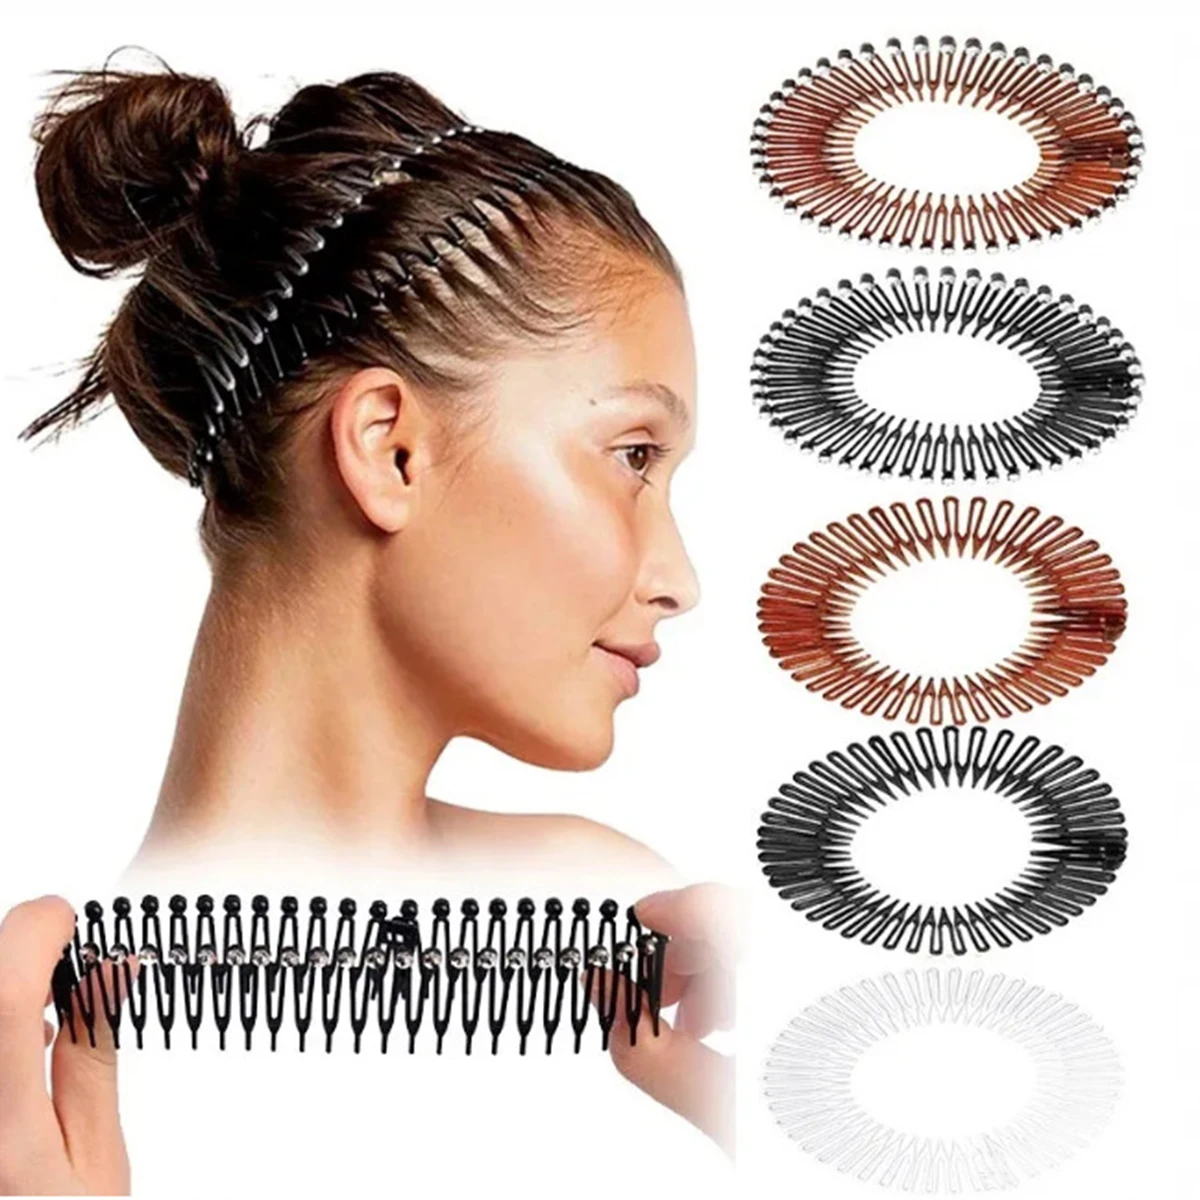 Good Quality 32cm Plastic Circular Wig Combs For Wig Caps Wig Clips For Hair Extensions Strong Black Lace Hair Comb butterfly type new horn comb natural black buffalo combs anti static hairdressing supplies for female gift hairbrush hot sale